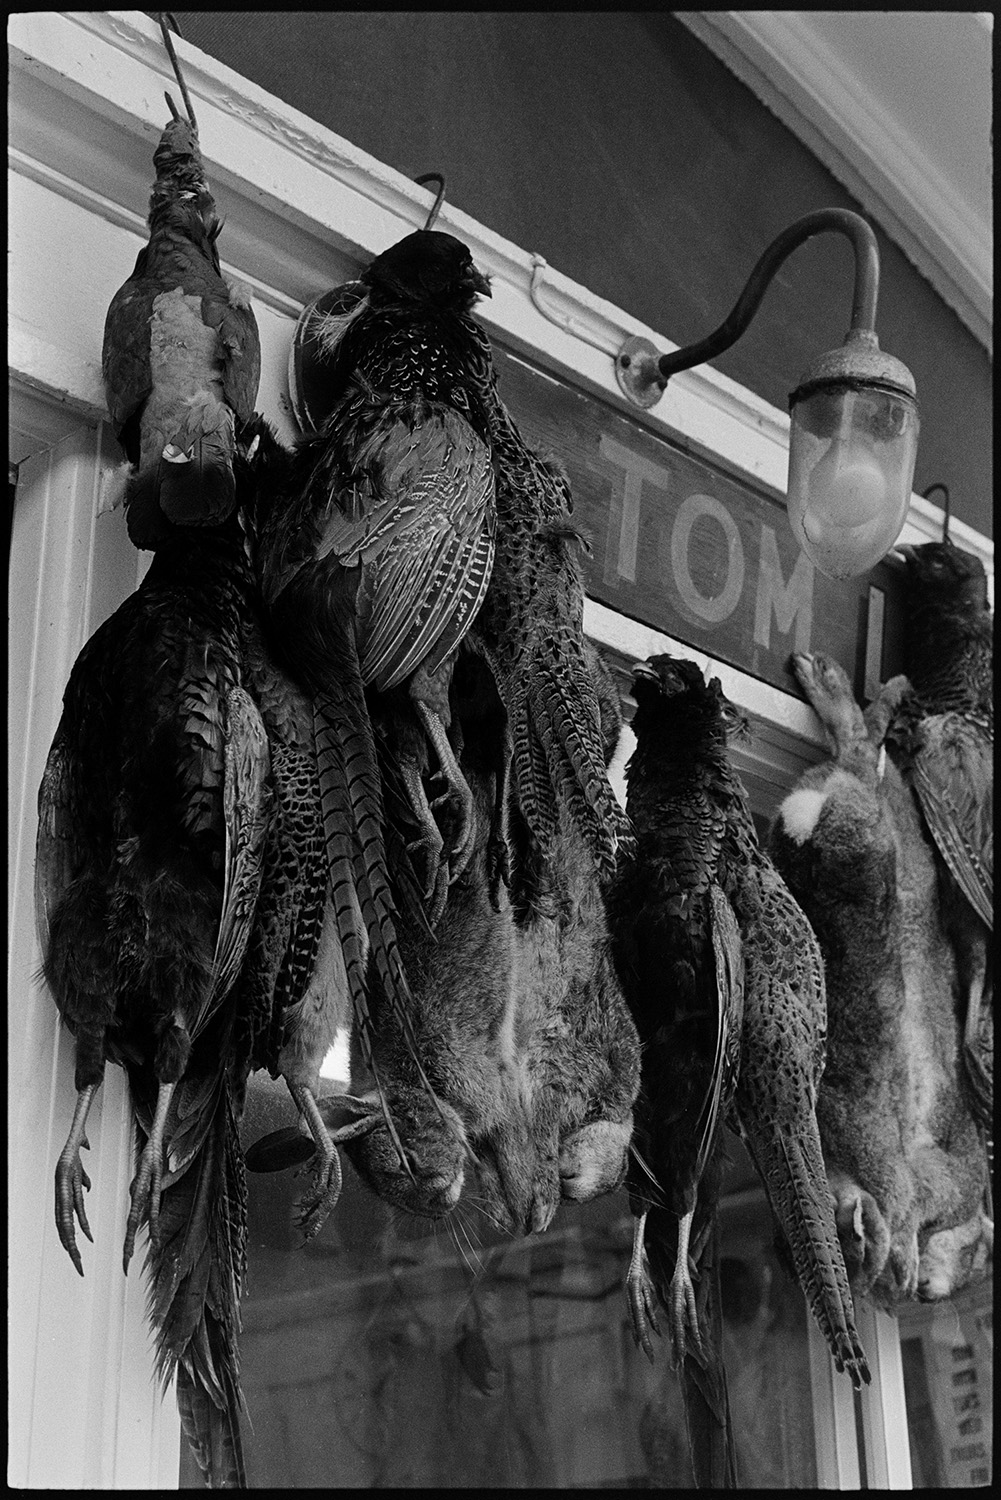 Game poultry hanging outside butchers shop.
[Pheasants, rabbits and a pigeon hanging outside Tom Lewis butcher's shop in Butchers Row, Barnstaple. An electric light fitting and part of the shop sign are visible.]